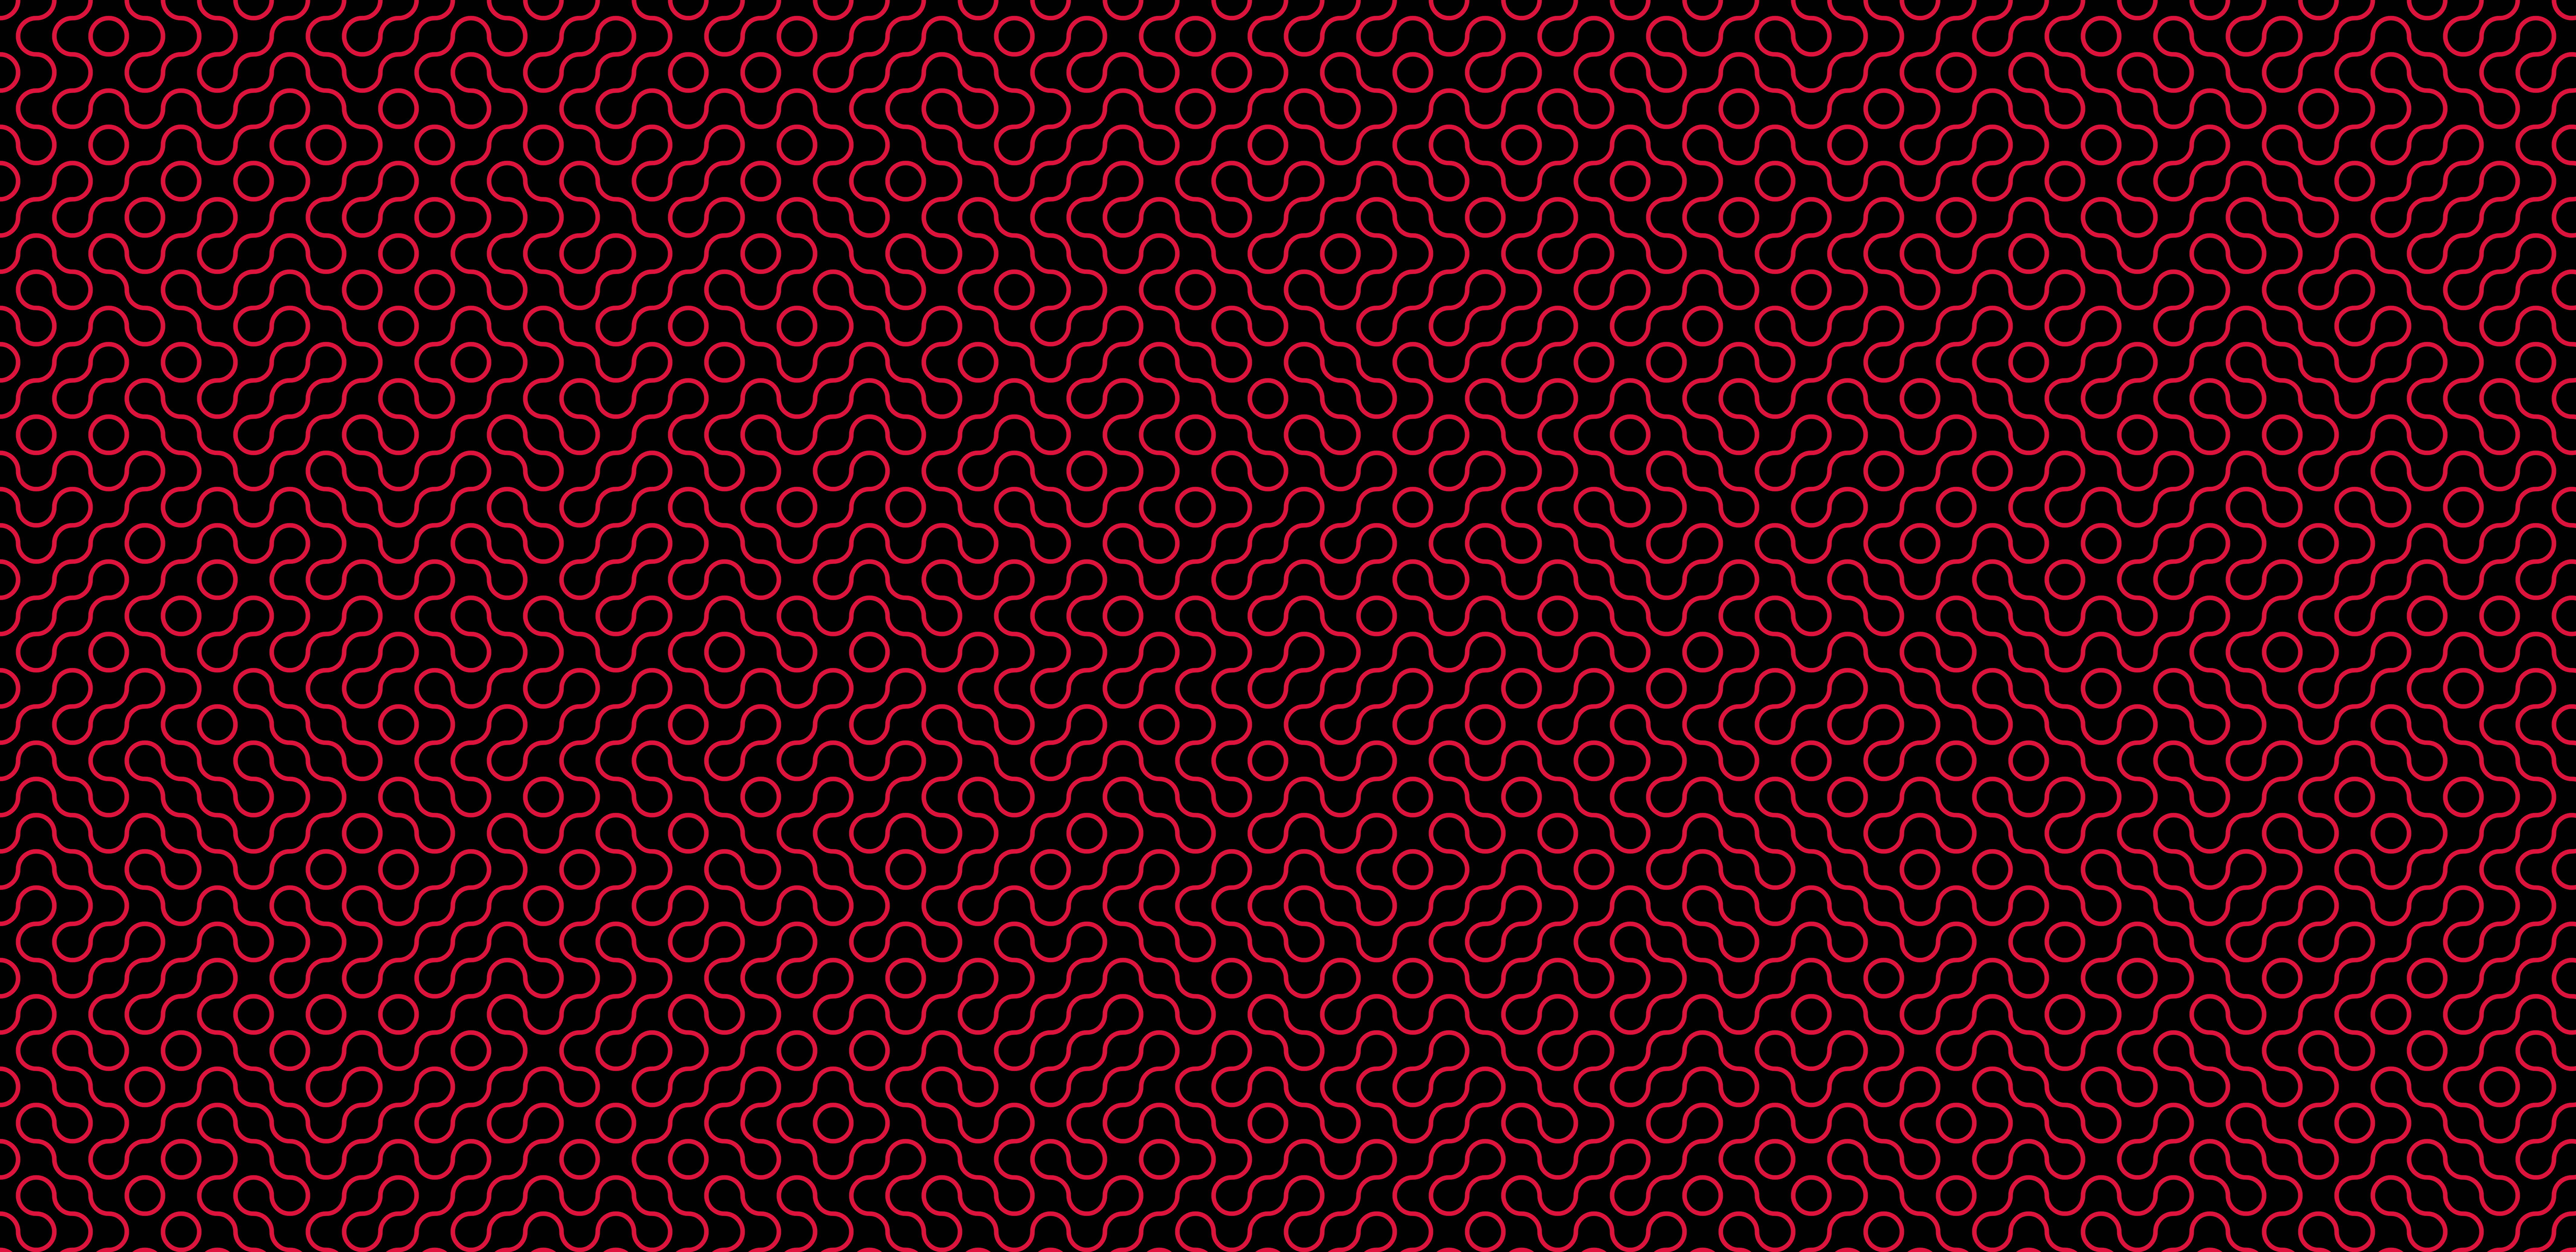 General 8533x4147 tiles abstract minimalism simple background maze pattern red